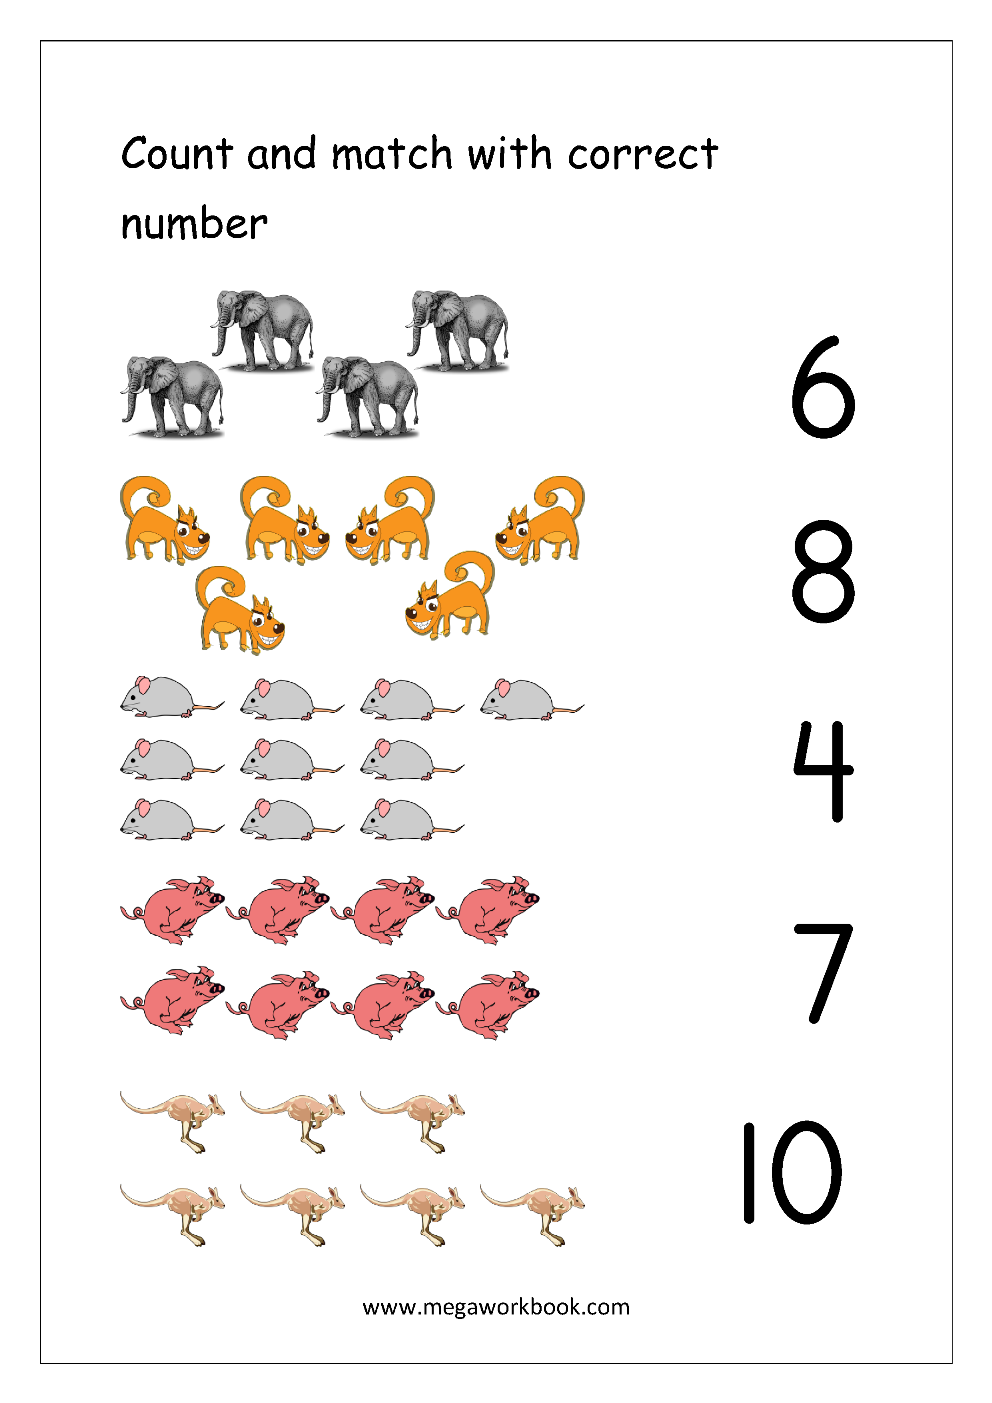 match-the-numbers-worksheet-free-matching-09-autispark